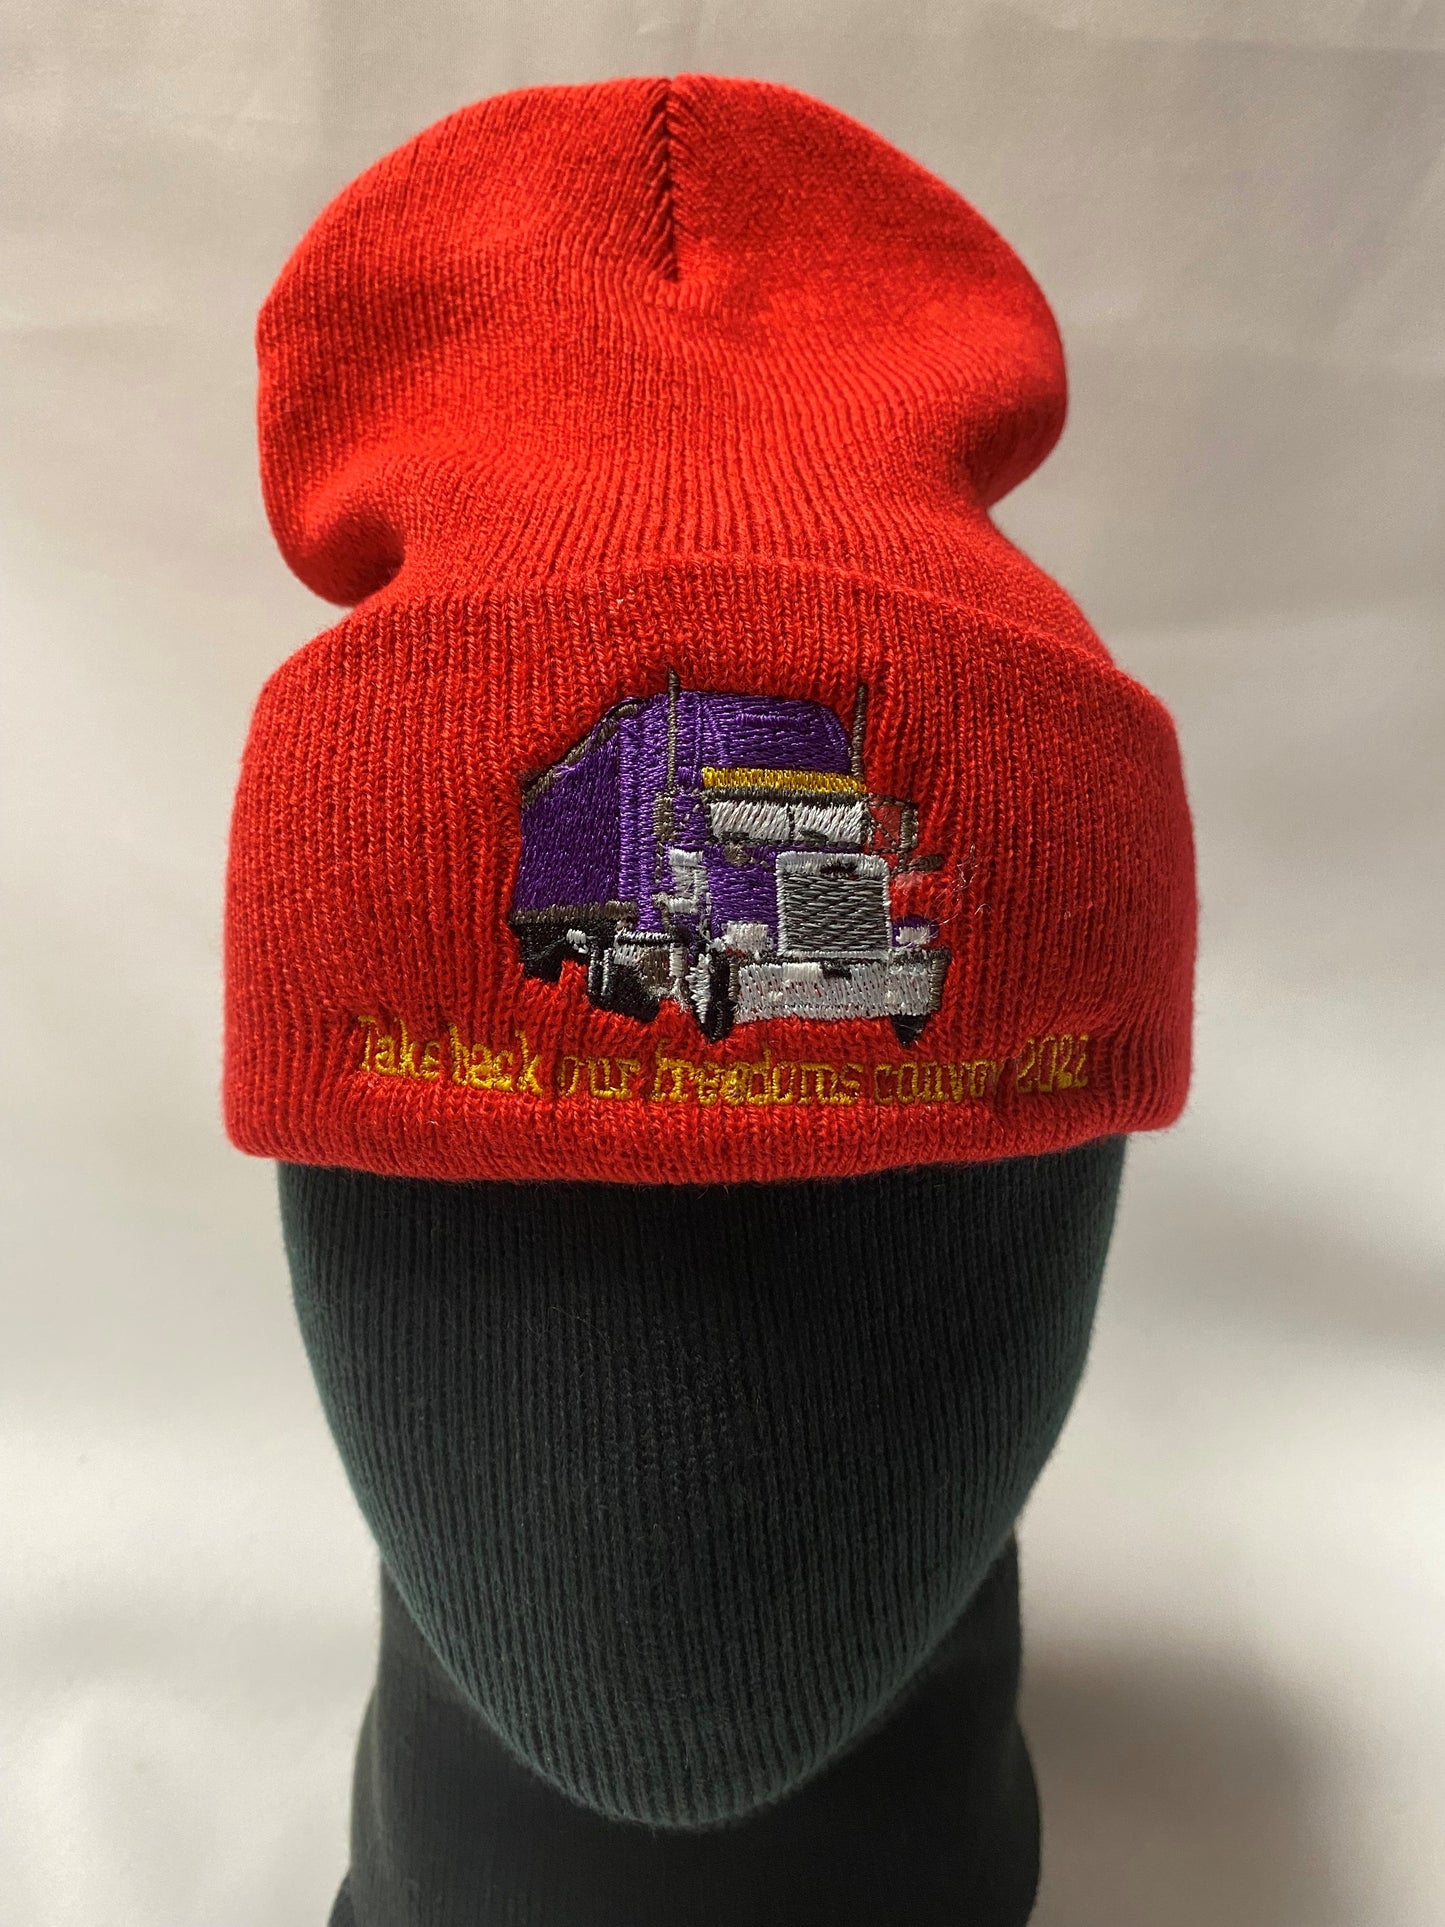 TRUCKER TOQUE red: "Take back our freedoms convoy 2022"